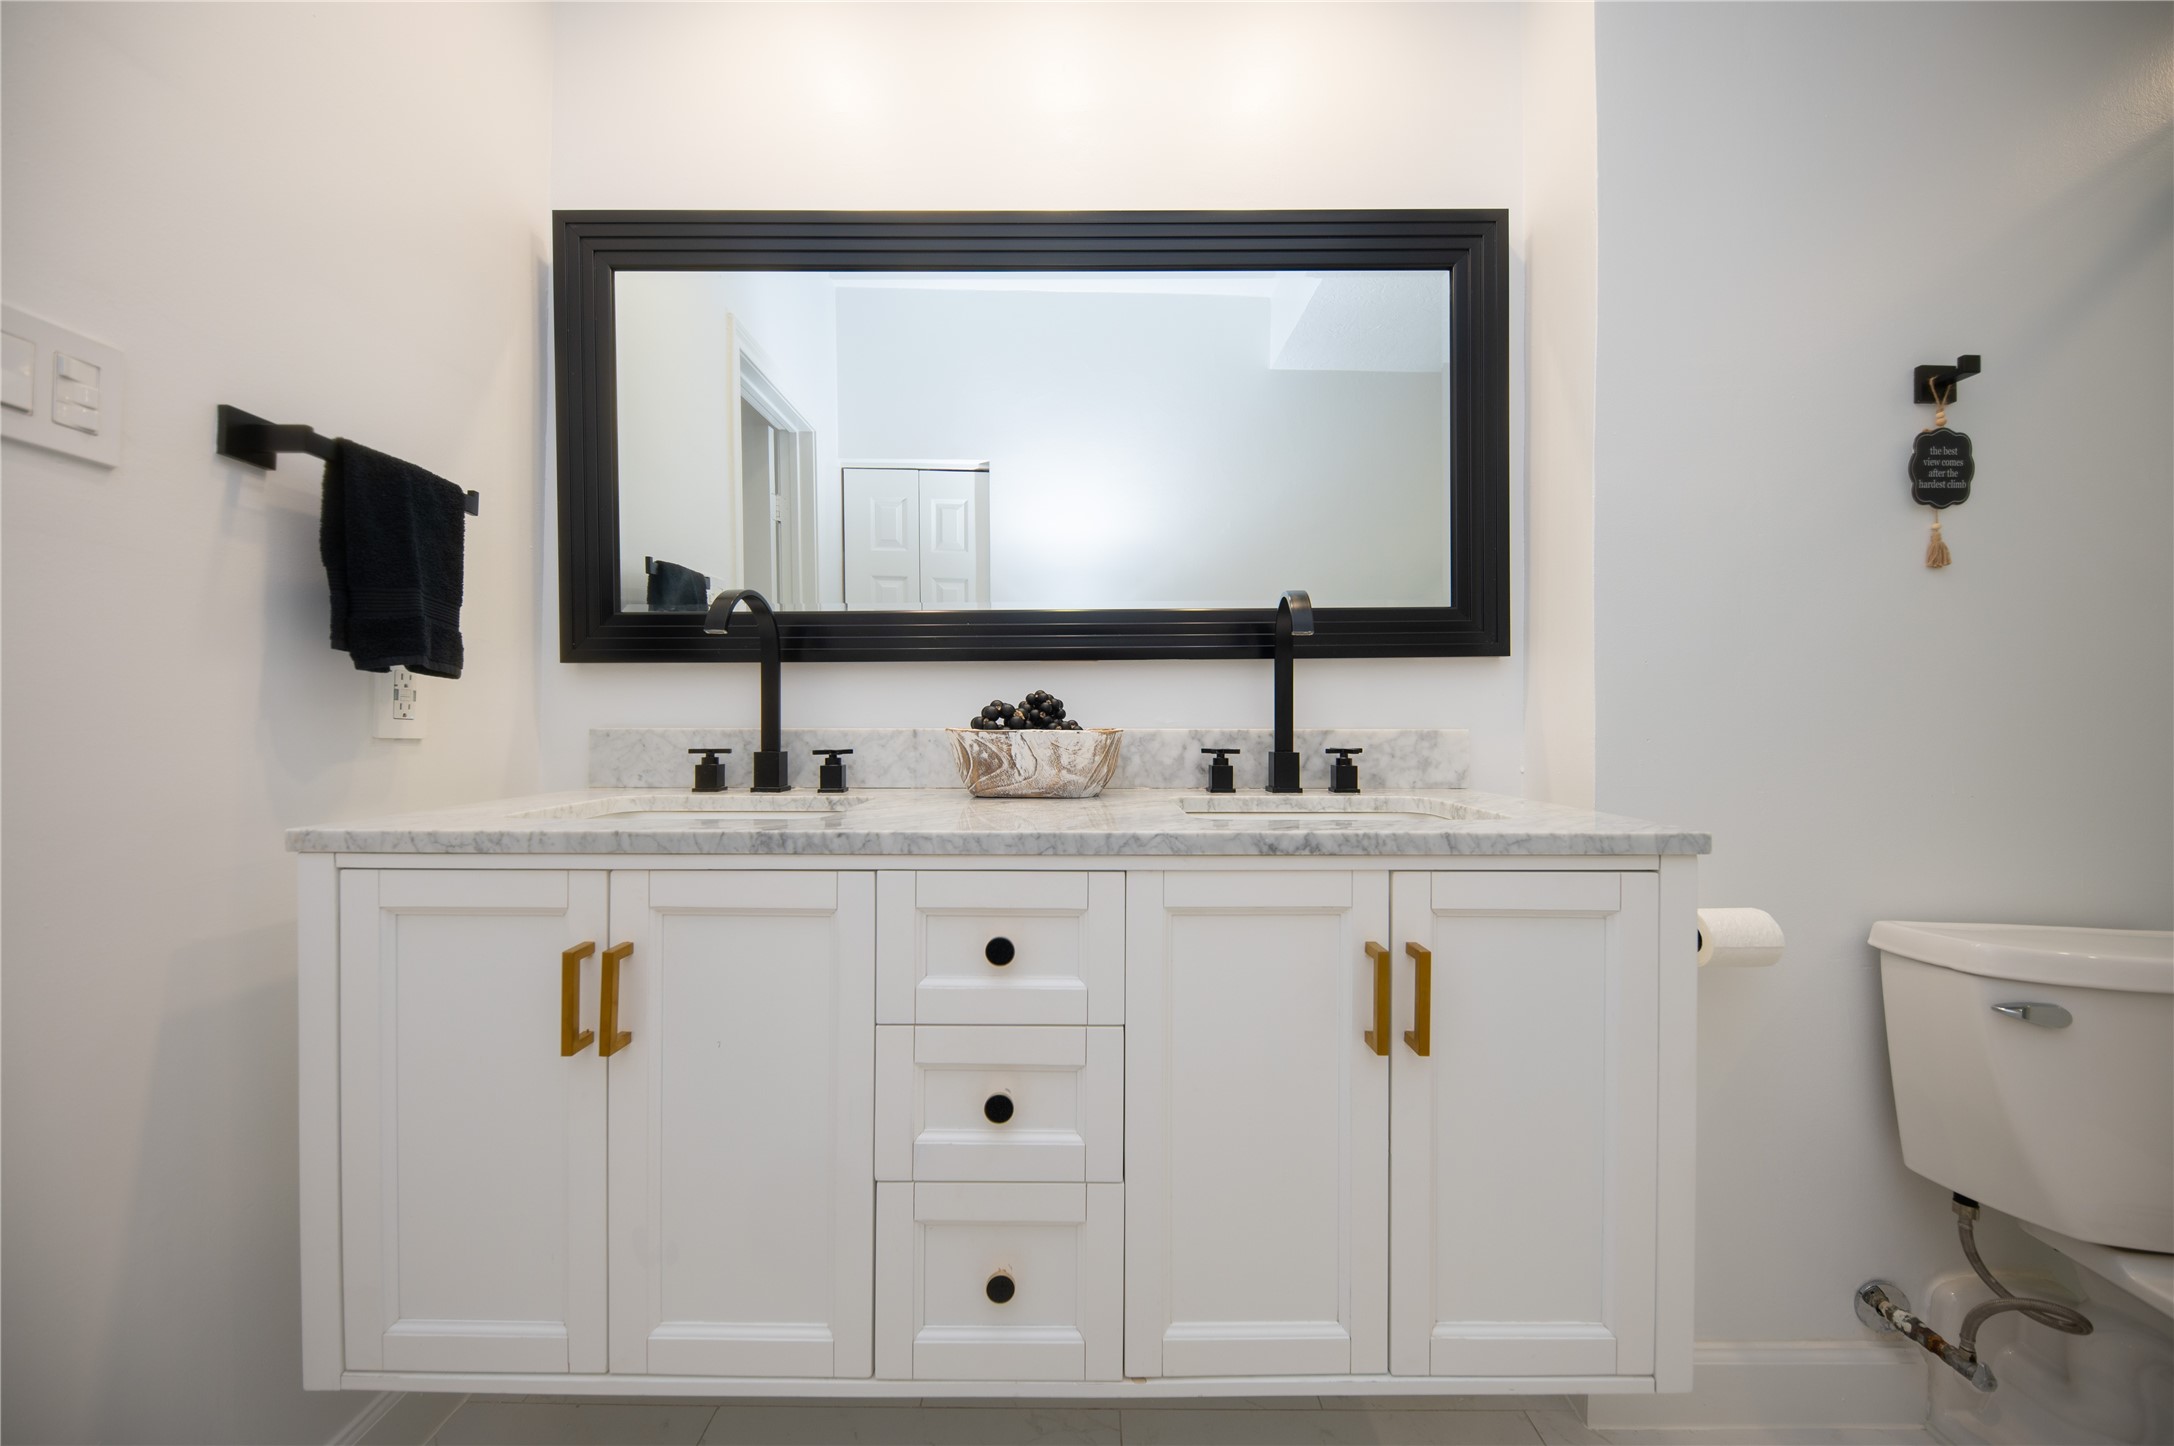 Welcome to this updated primary bathroom. This full on shot highlights the bathroom vanity with warm gold pull handles and black and gold drawer pulls.